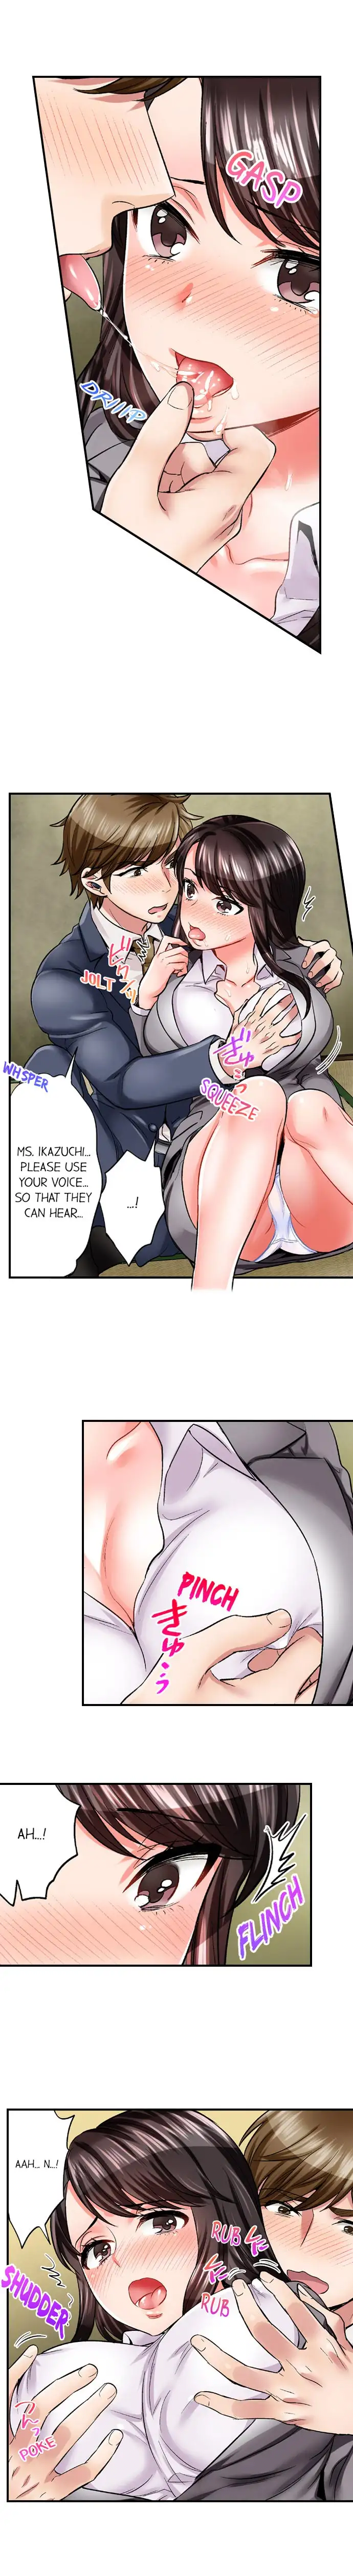 Sex is Part of Undercover Agent’s Job? - Chapter 2 Page 3